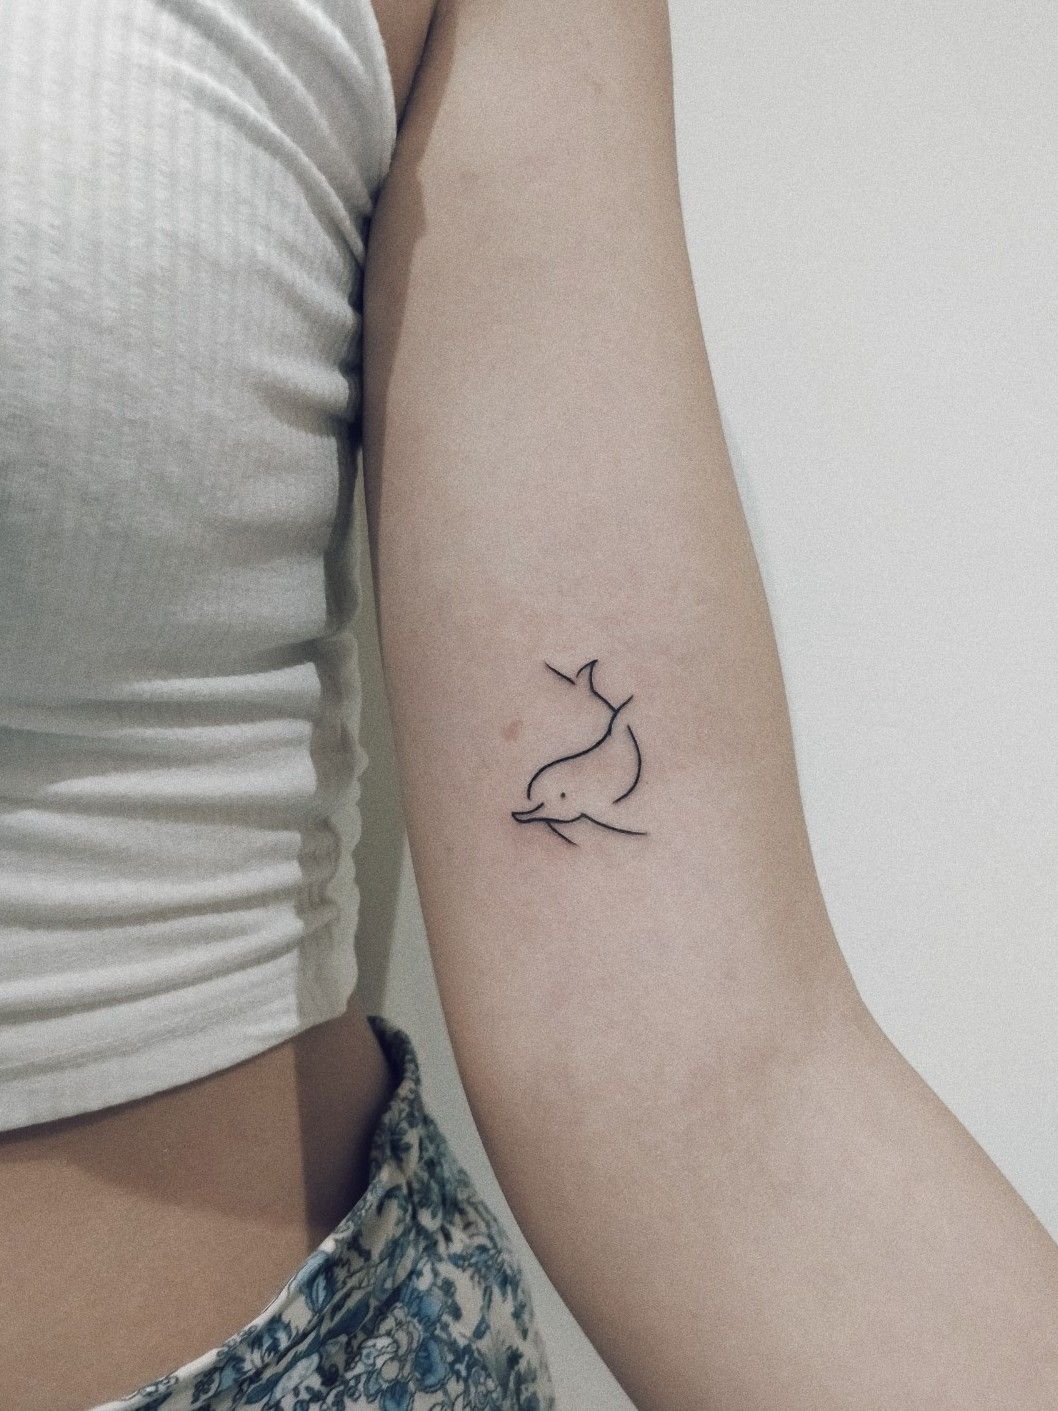 Fine line dolphin tattoo located on the ankle